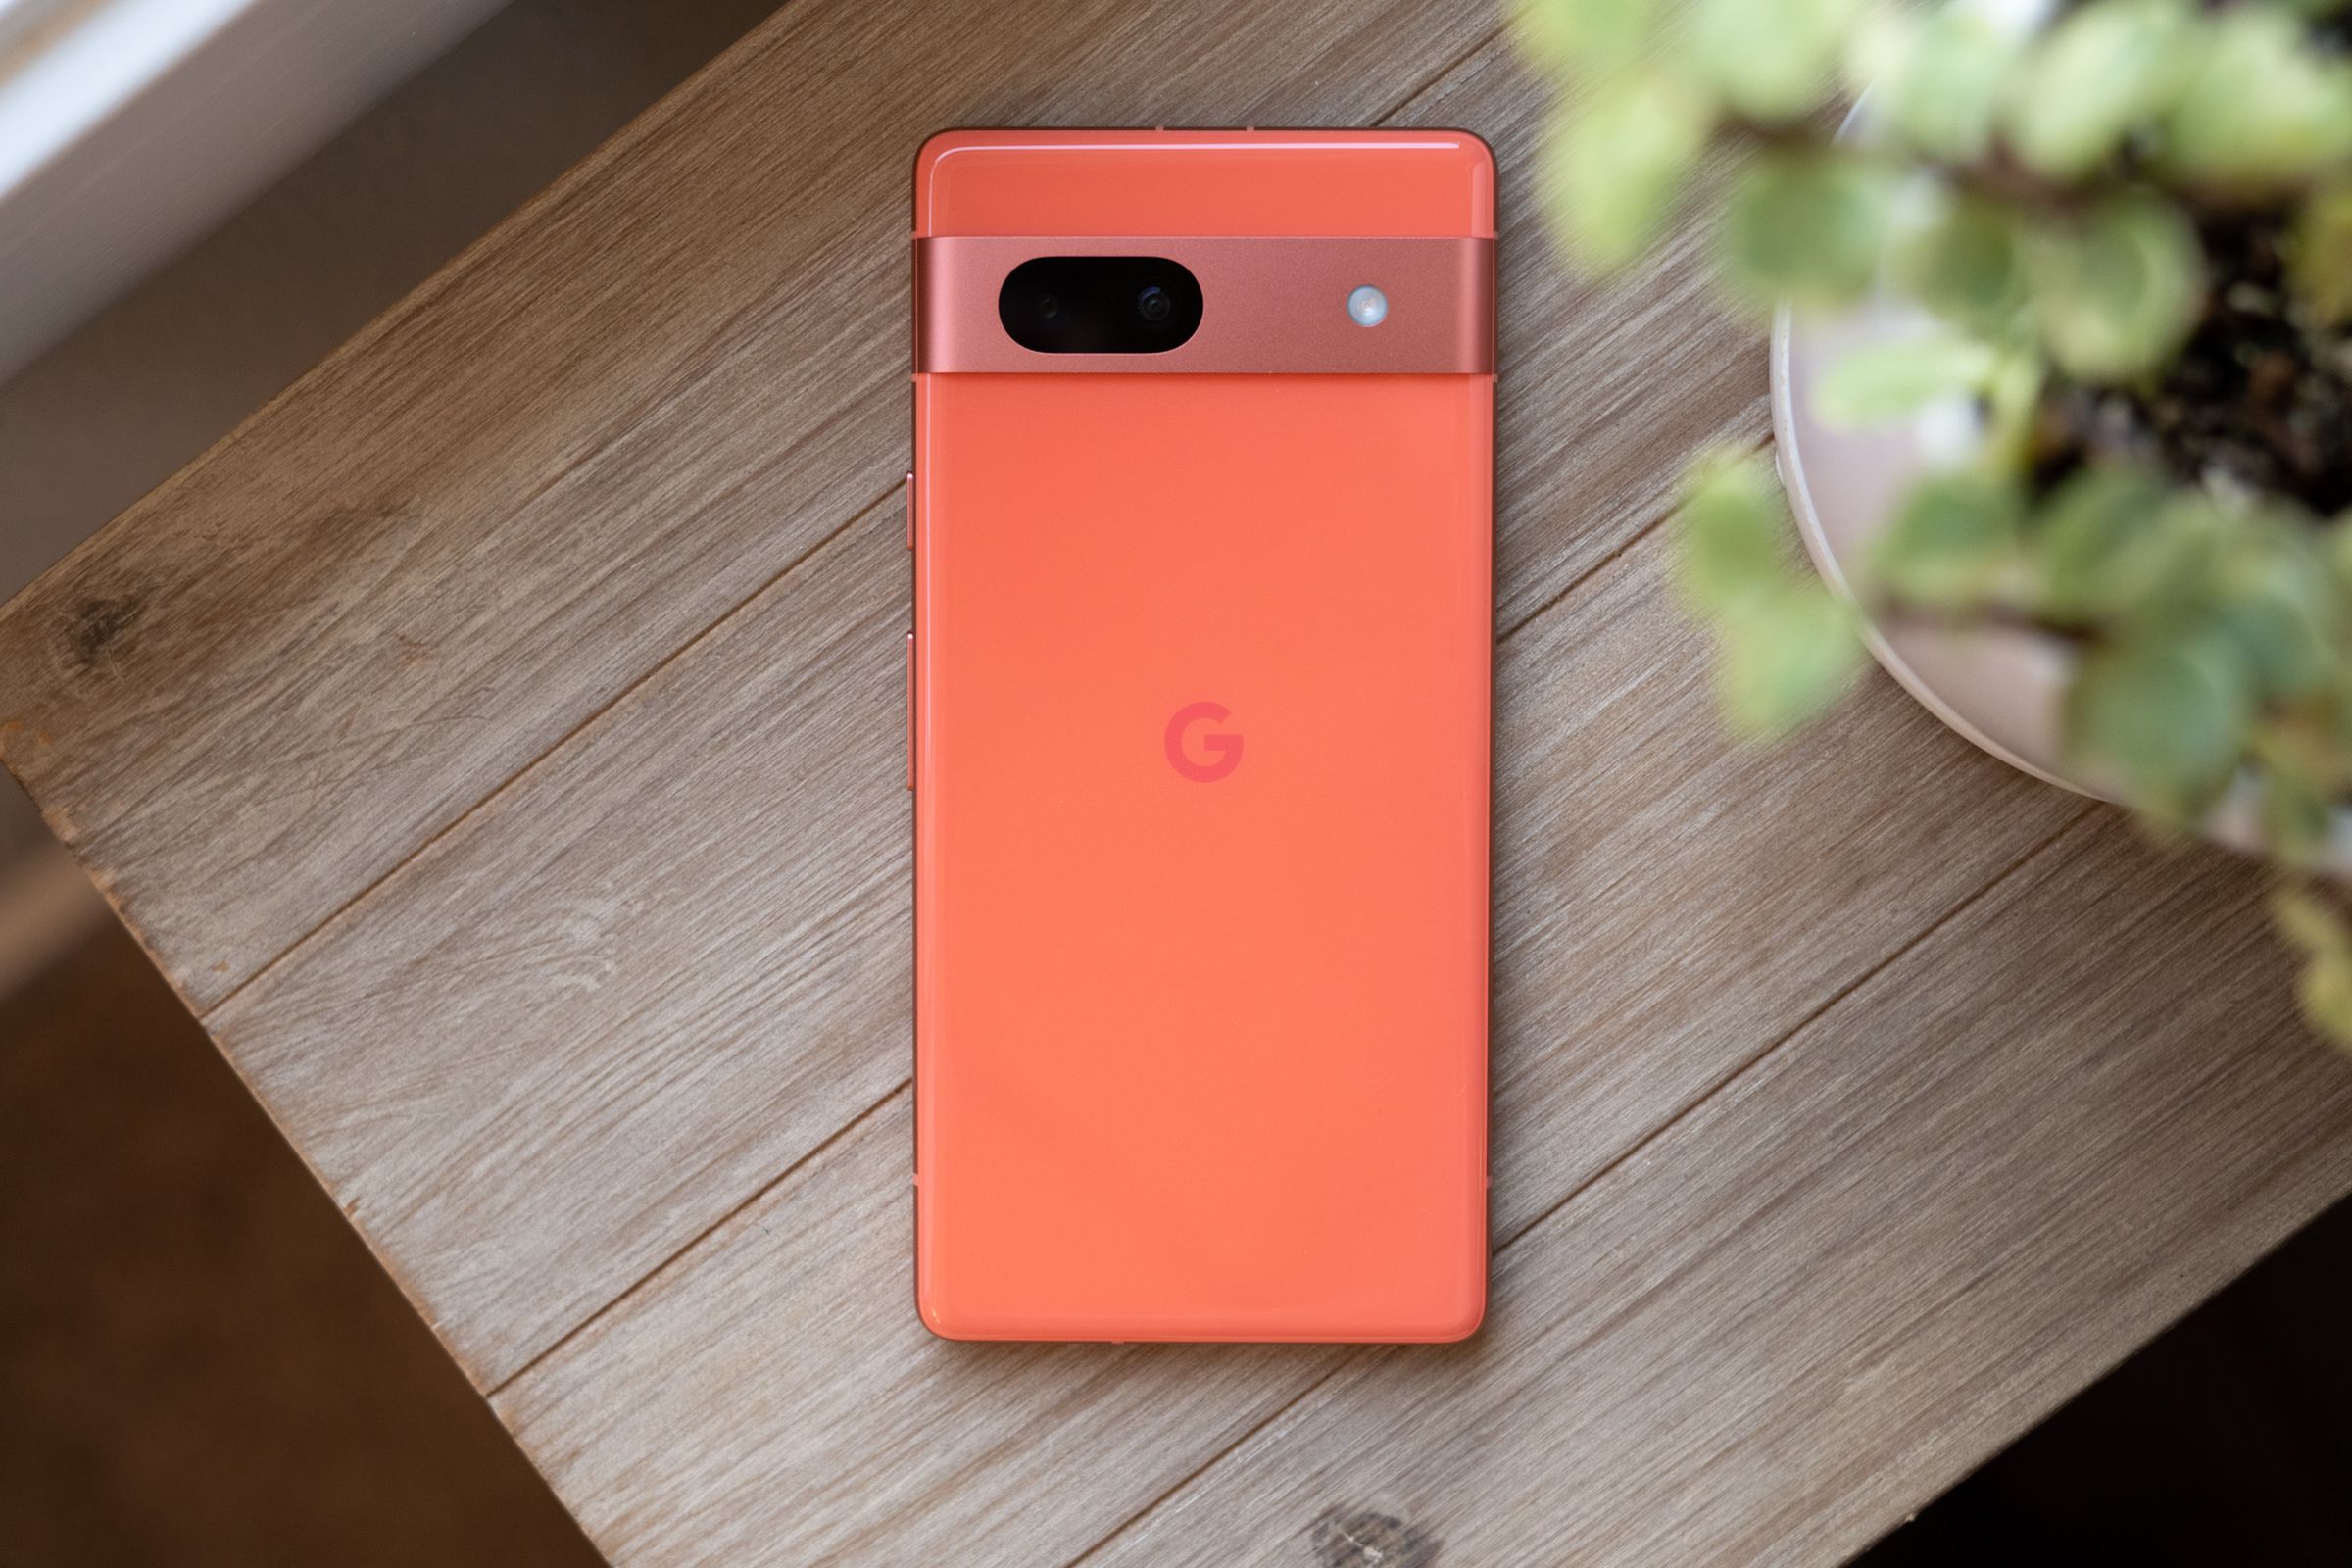 Google Pixel 7A in coral on a wooden table showing rear panel.